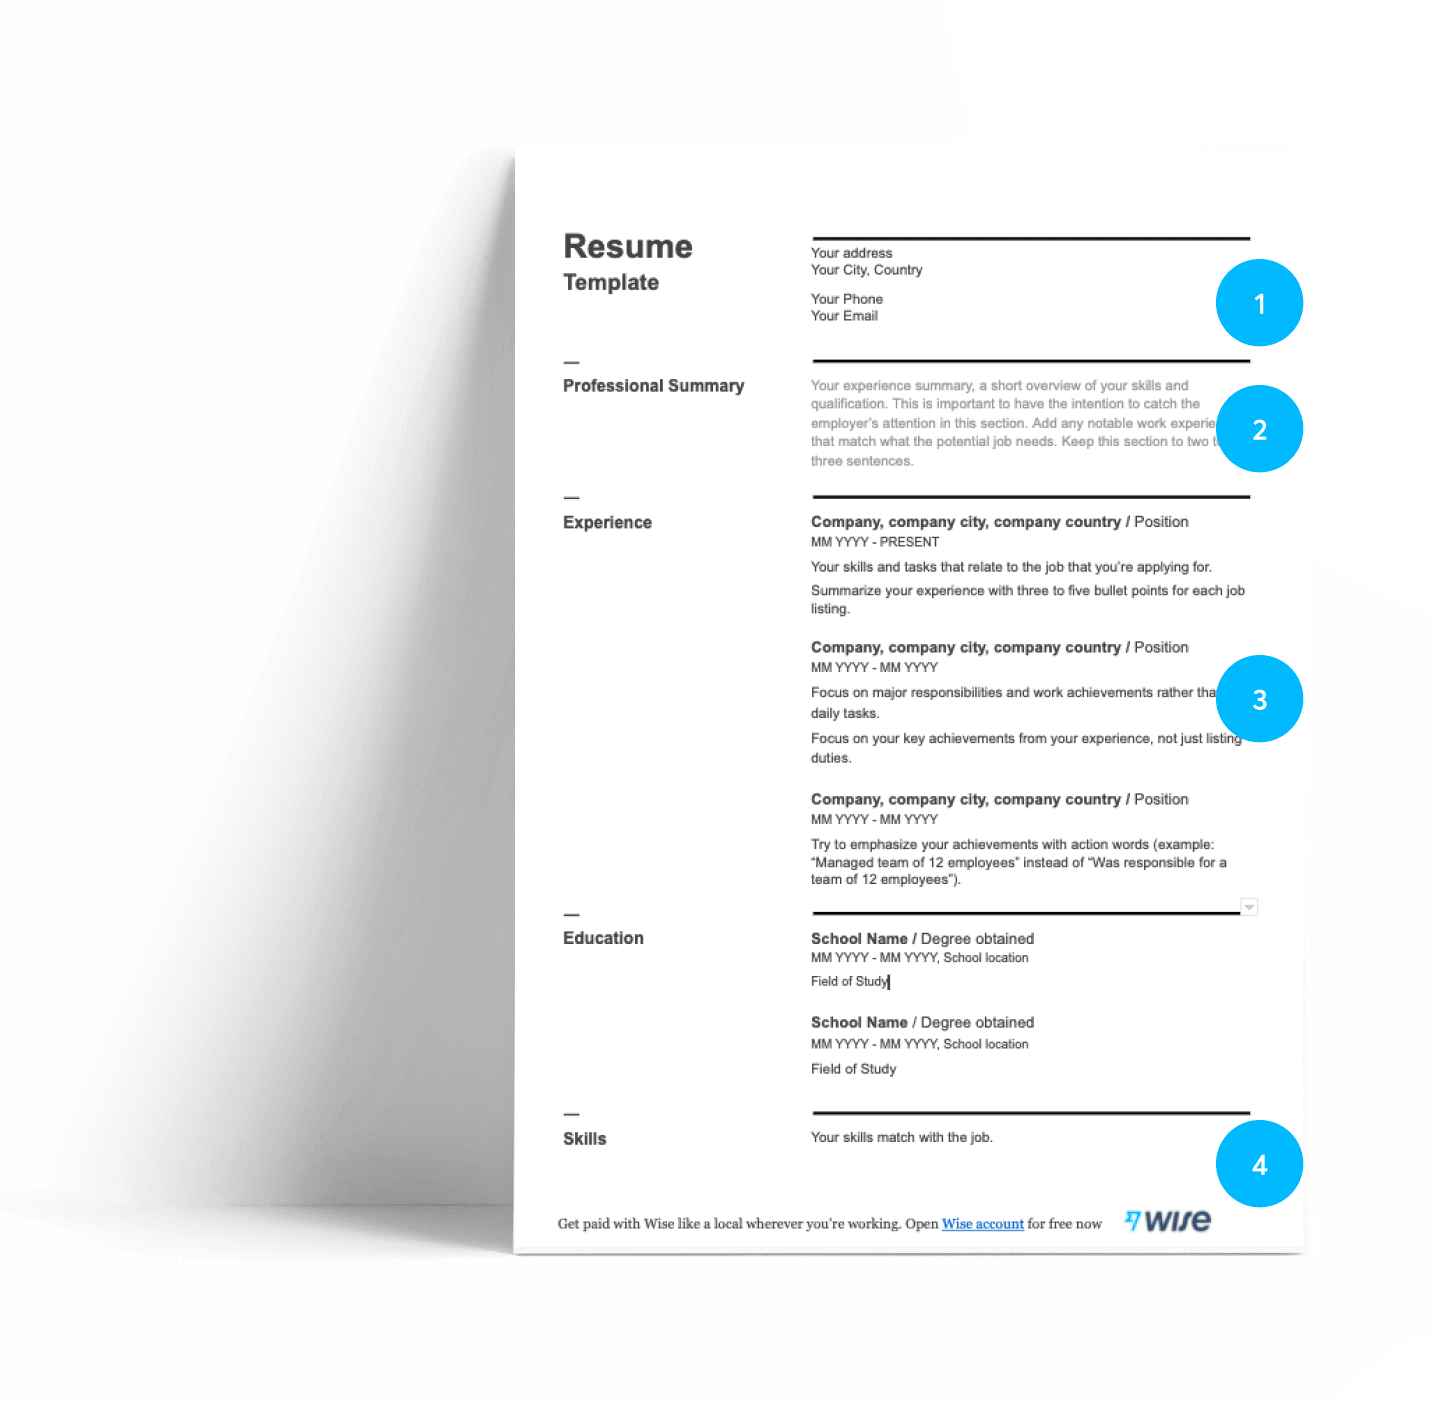 How to write a a transport & engineering resume?